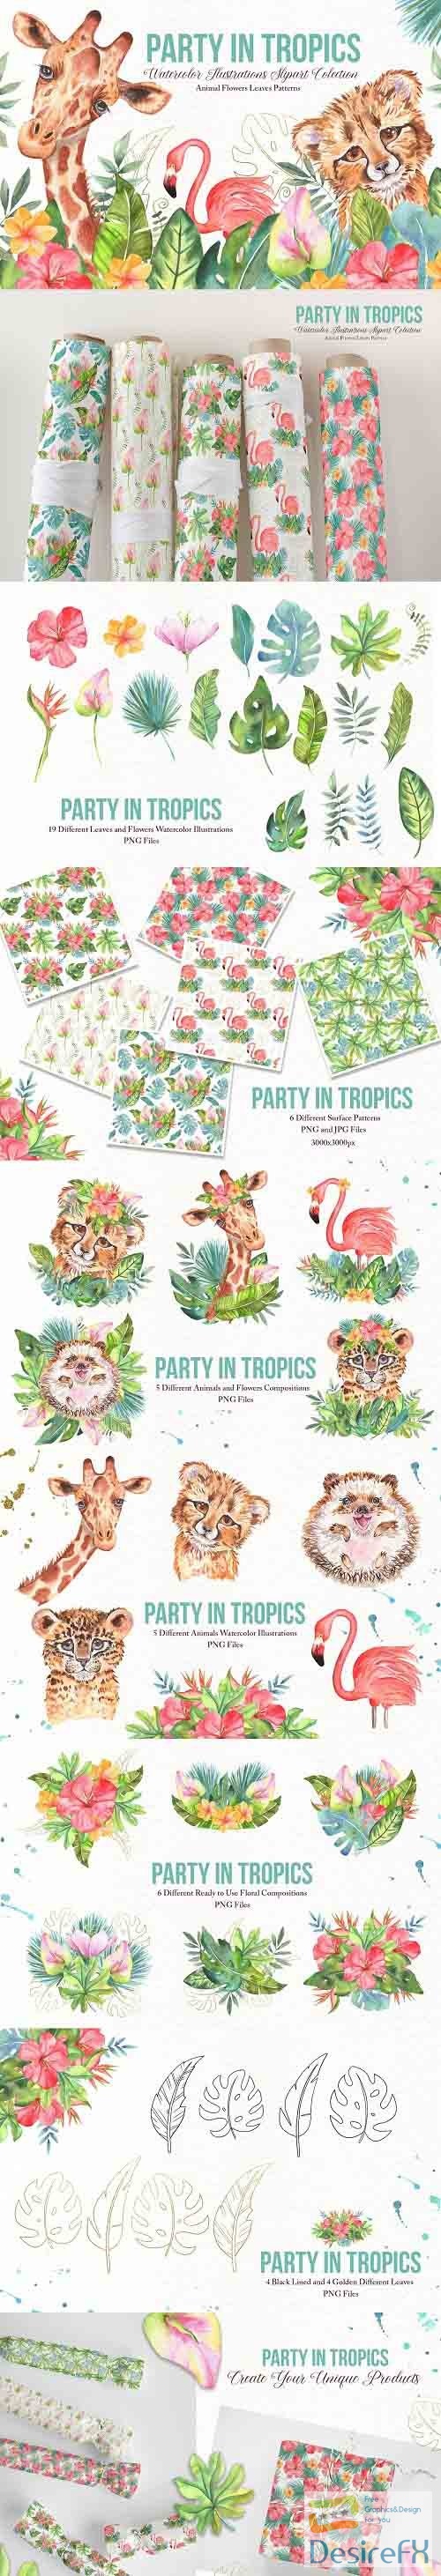 Watercolor Tropical Party - 6091590